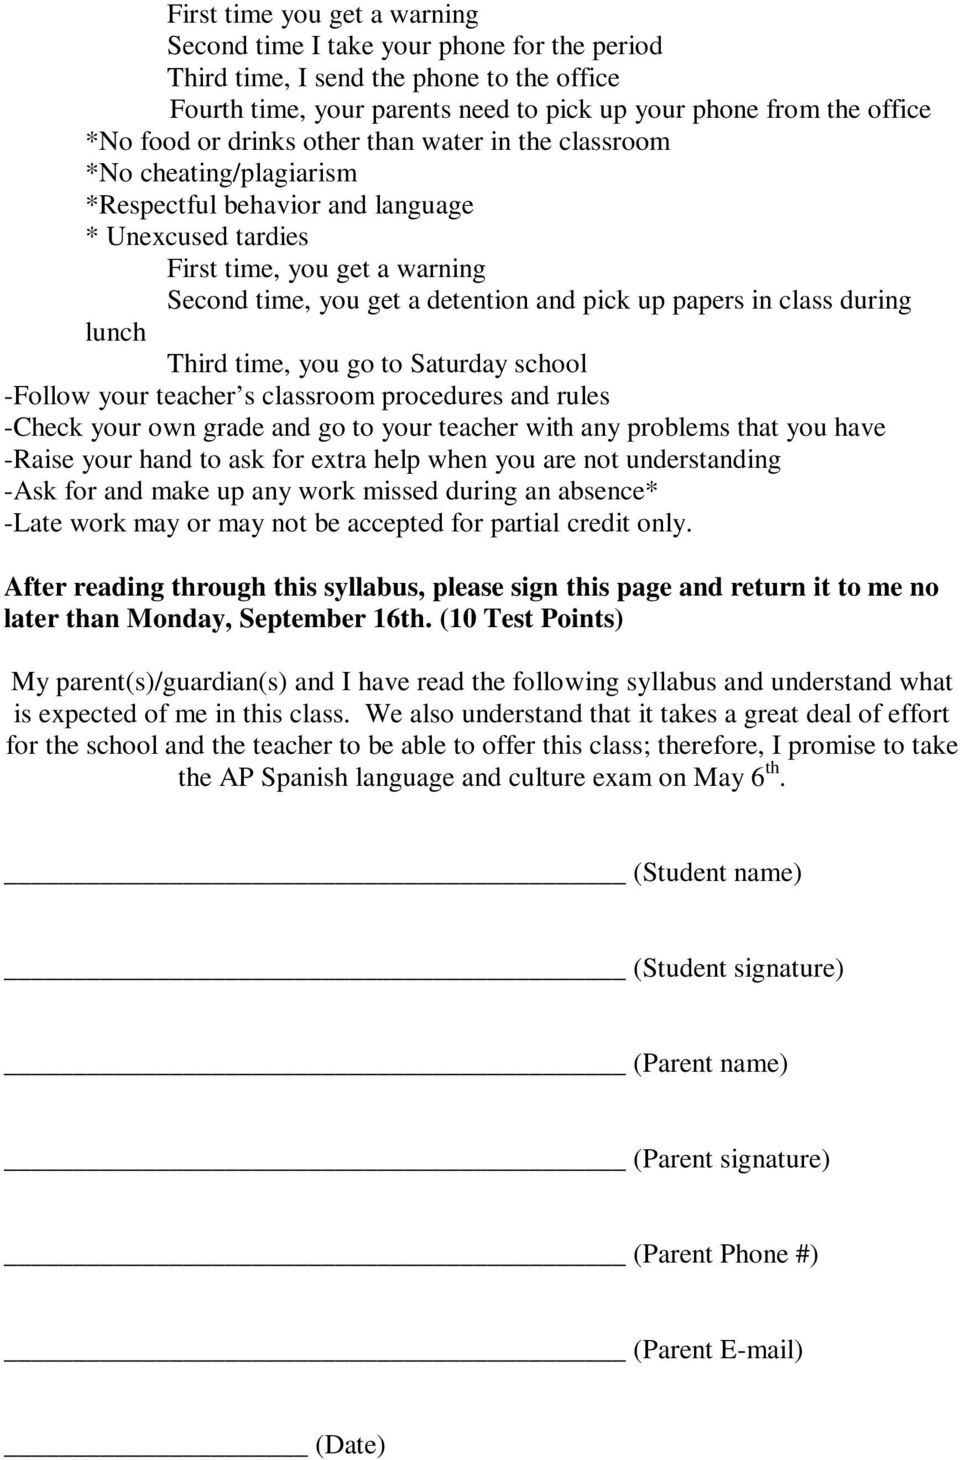 papers in class during lunch Third time, you go to Saturday school -Follow your teacher s classroom procedures and rules -Check your own grade and go to your teacher with any problems that you have